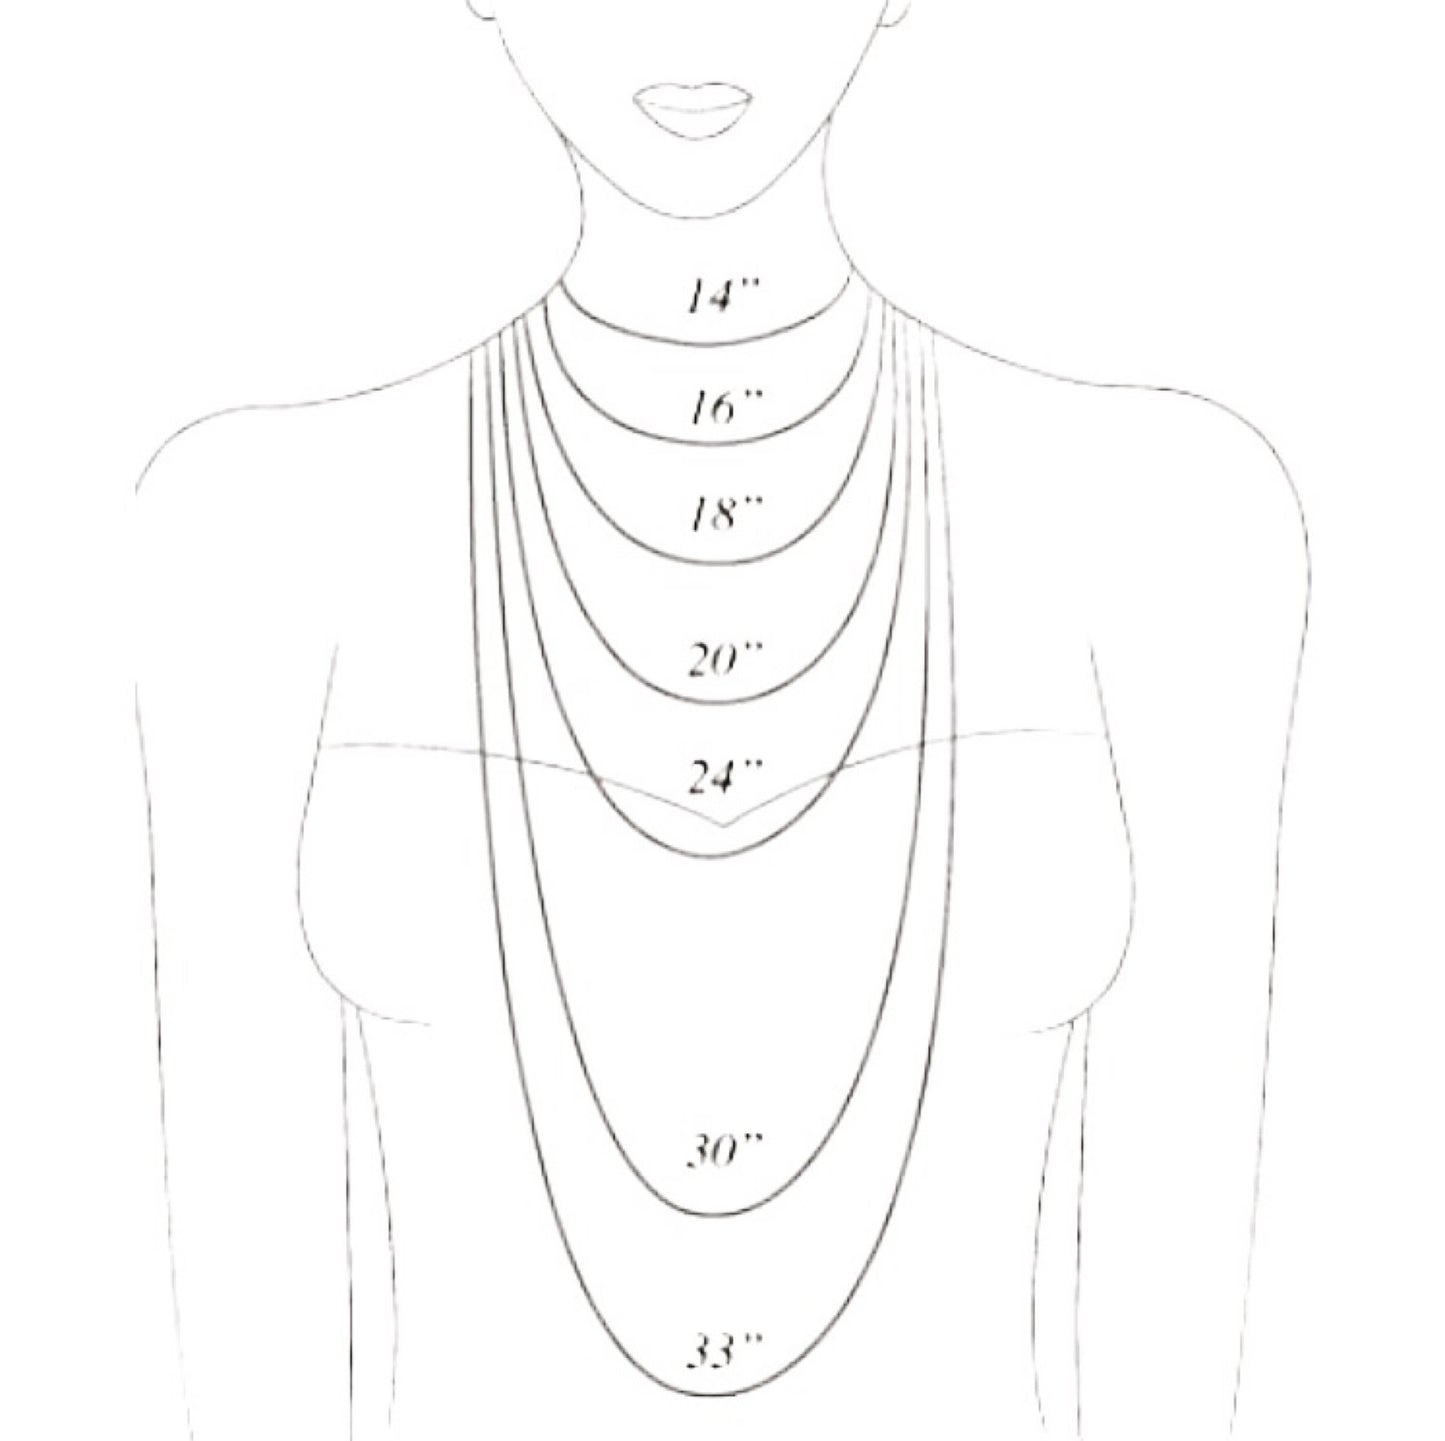 Graphic illustrating the different chain lengths on a woman's body.